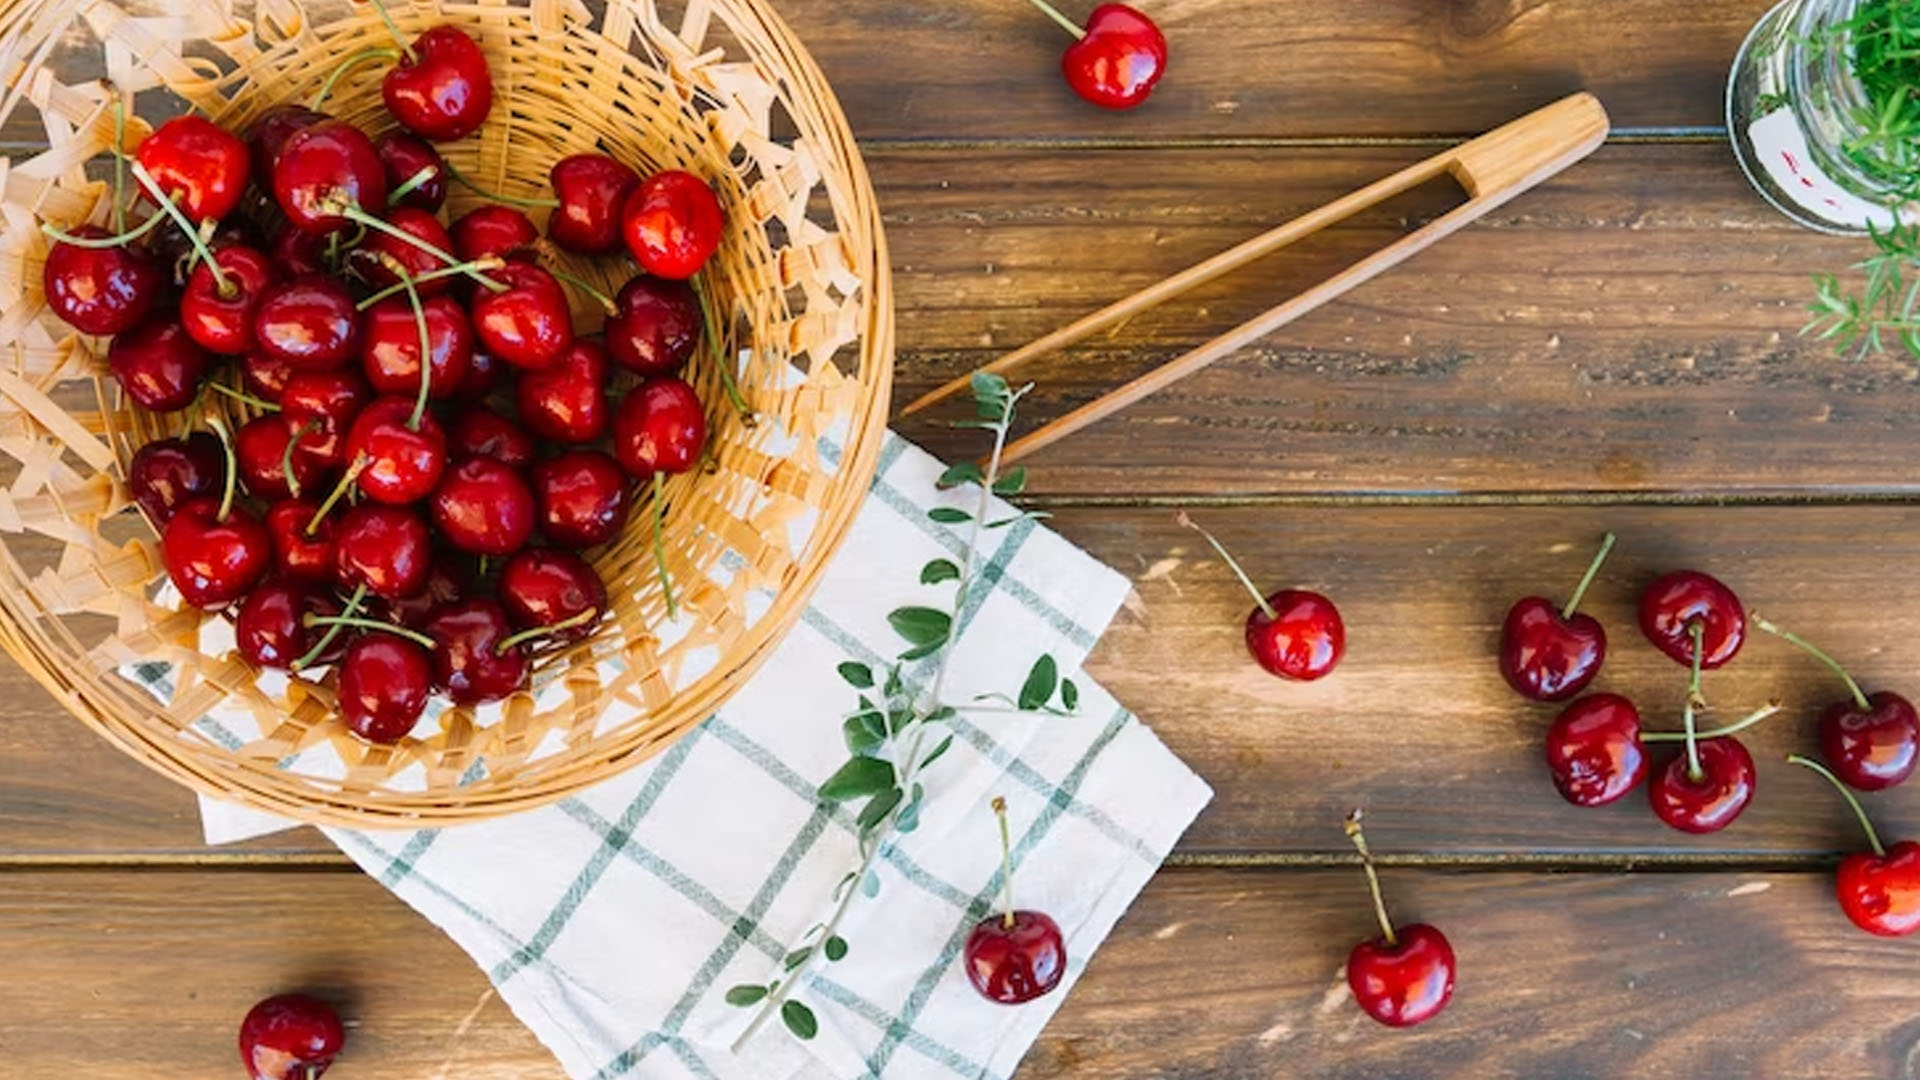 What Are The Health Benefits of Tart Cherry?